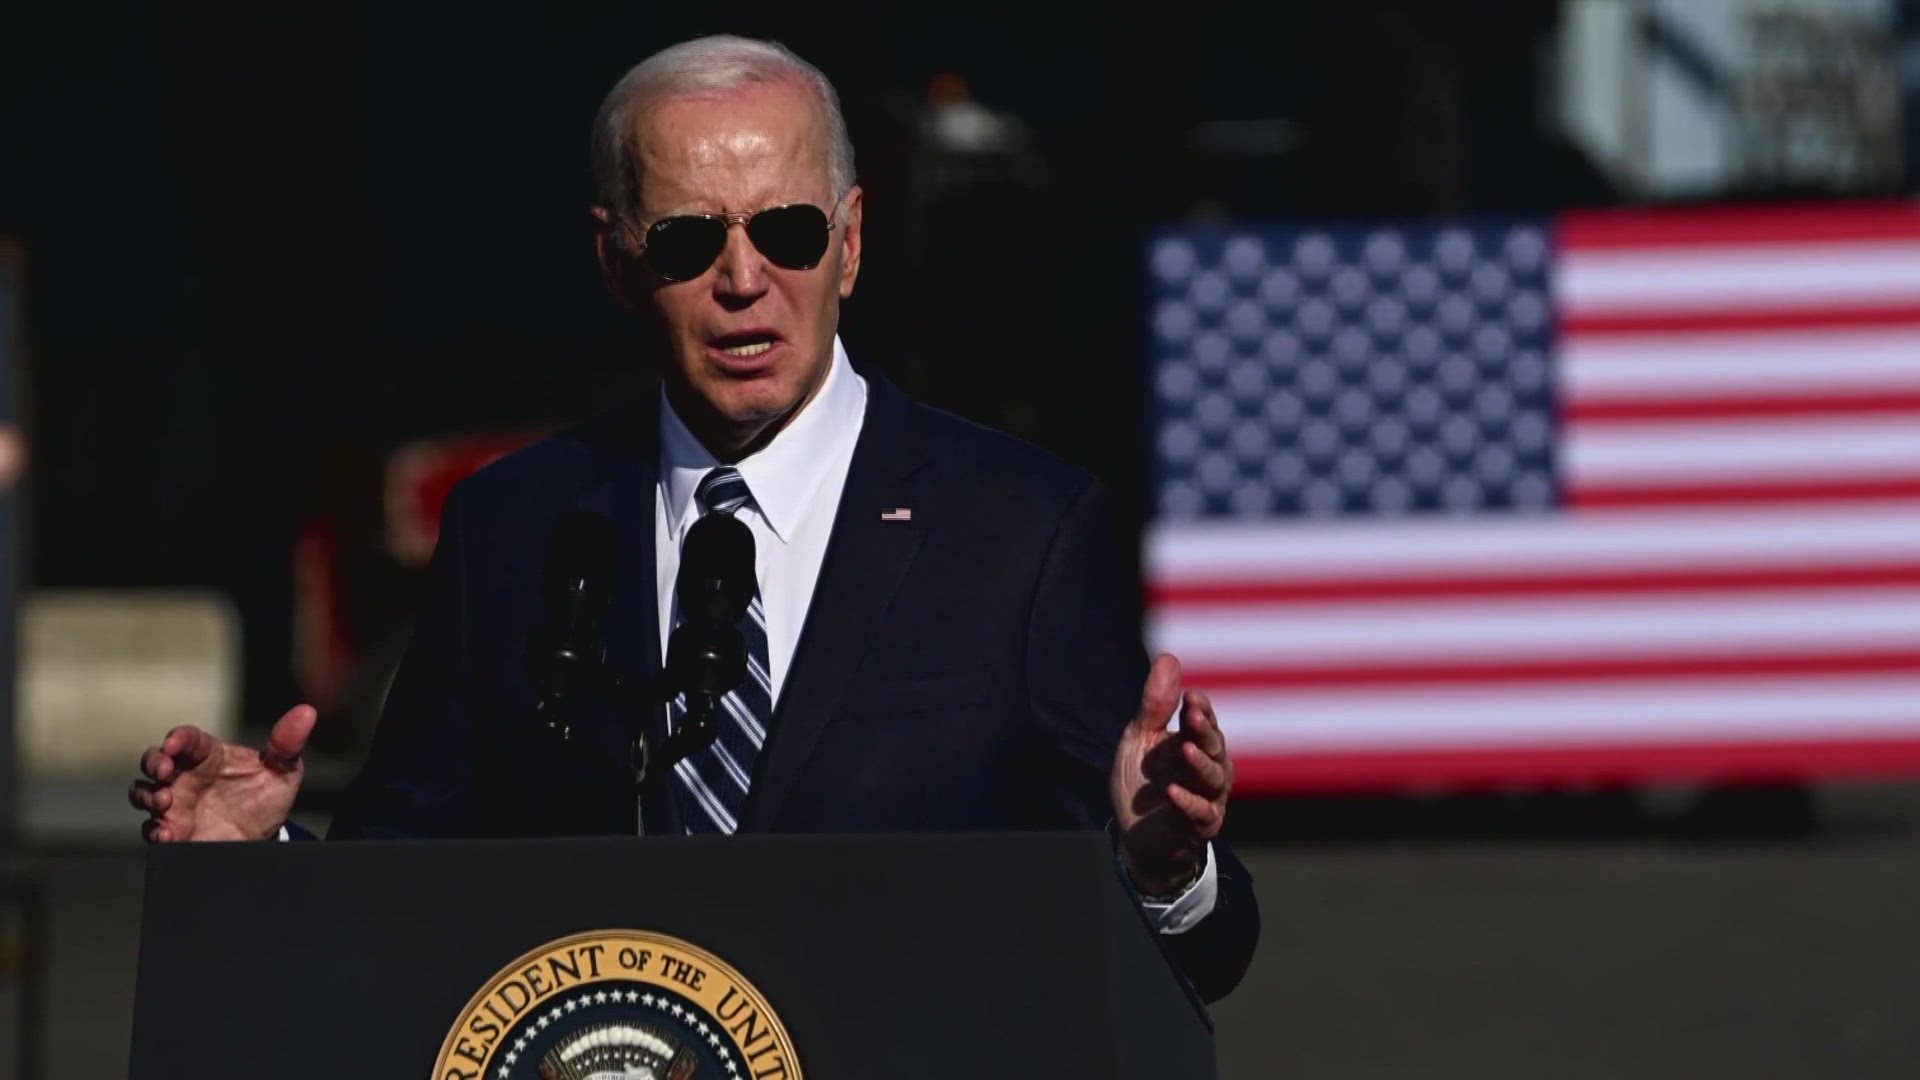 President Biden comments on recent shooting spree in Texas